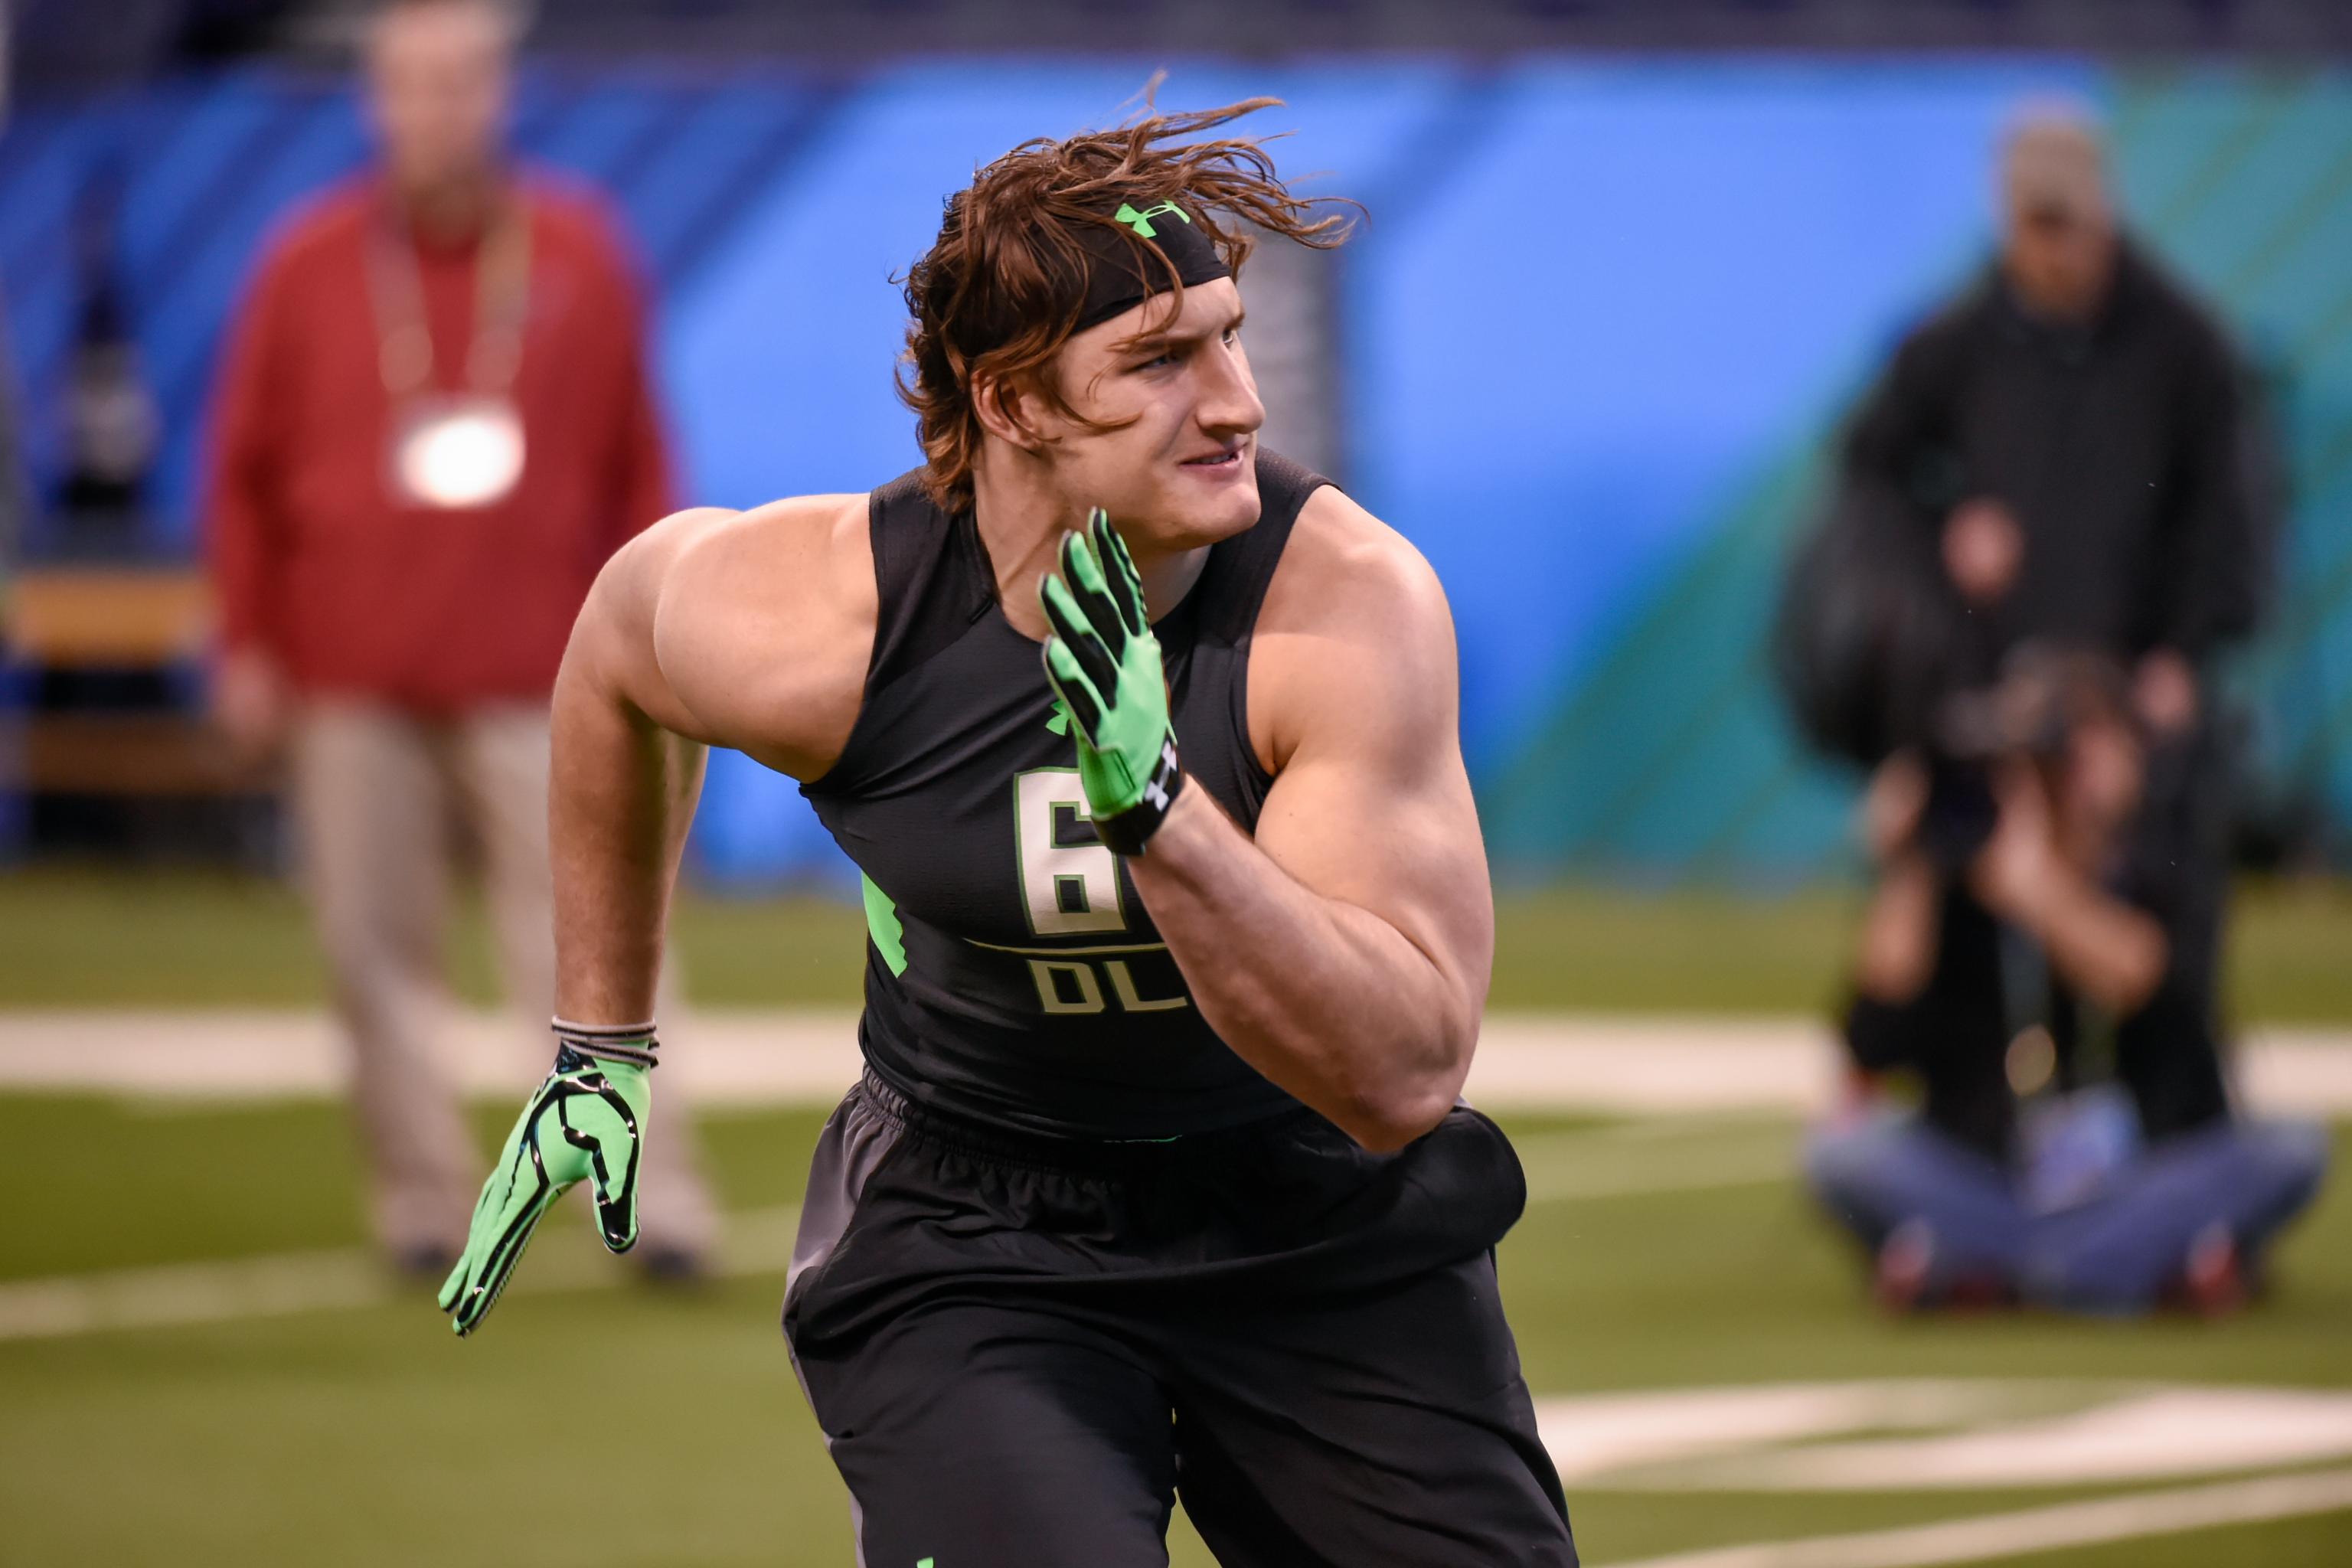 Joey Bosa at Ohio State Pro Day 2016: Photos, Video Highlights and